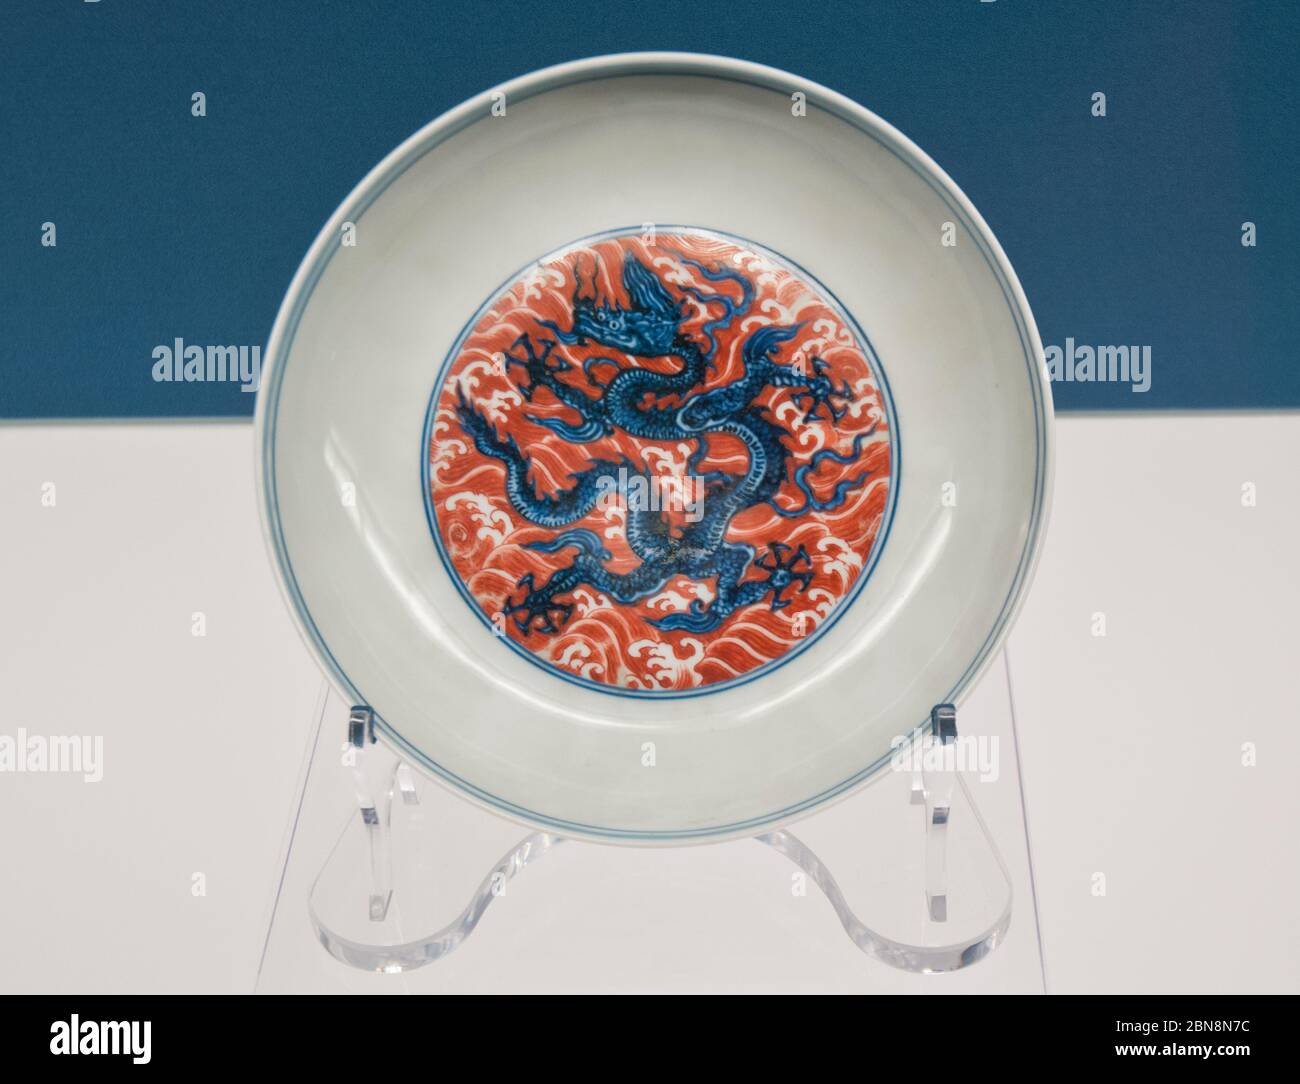 Chinese porcelain: Dish with blue-and-white dragons amid red enamel waves - Jingdezhen Porcelain Wares (mid fiftheenth Century). Shanghai Museum Stock Photo